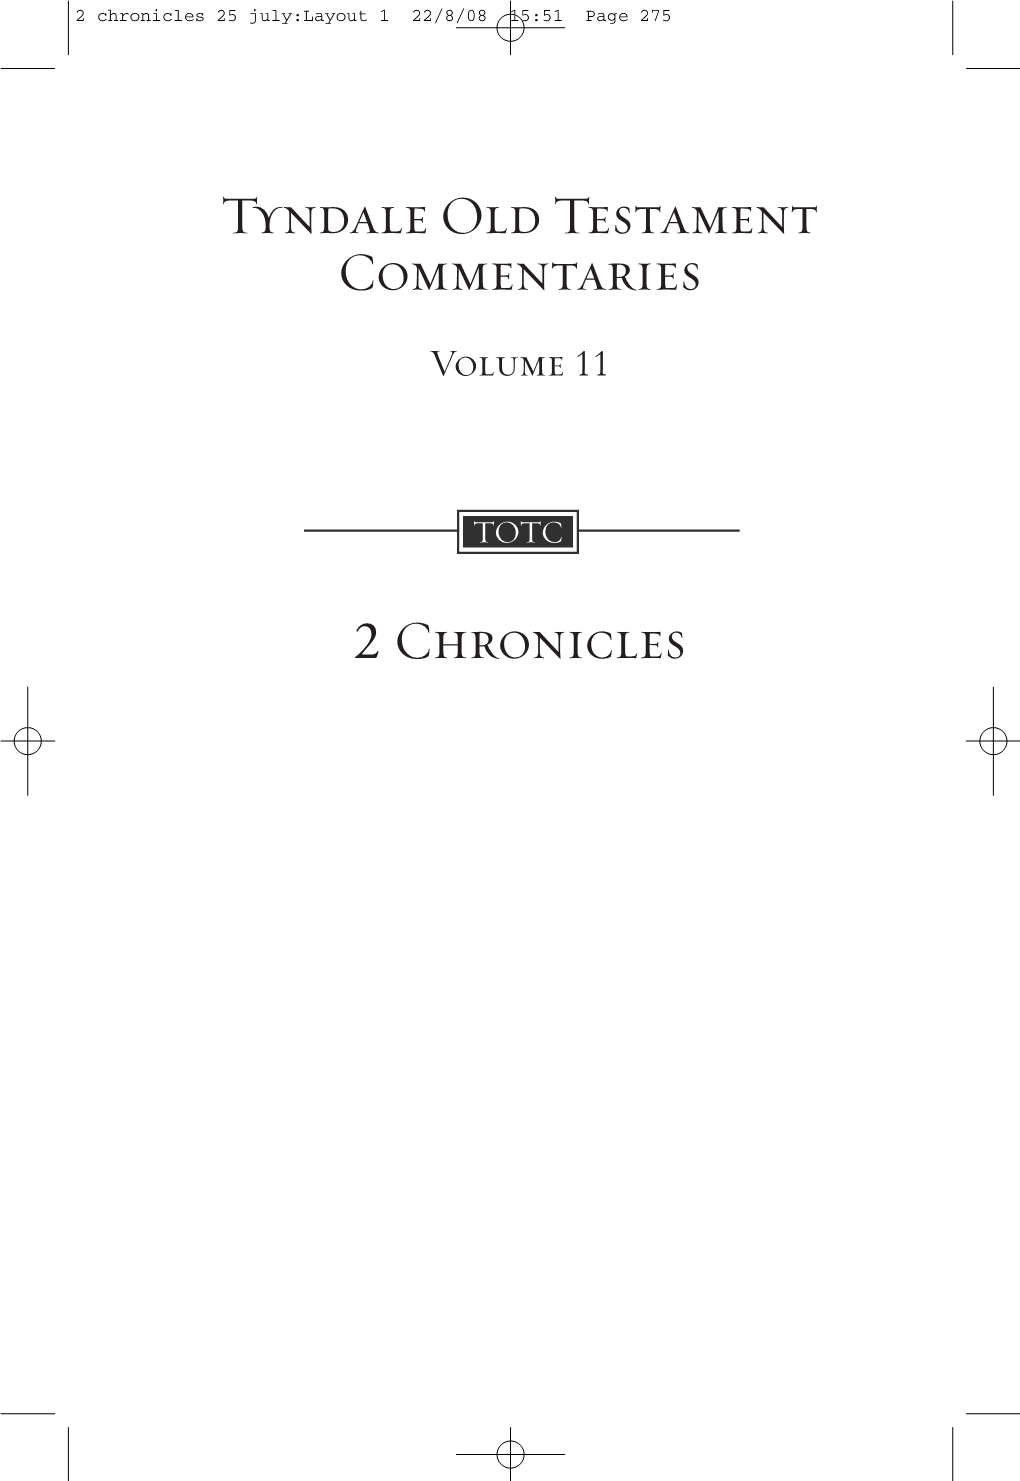 Tyndale Old Testament Commentaries 2 Chronicles